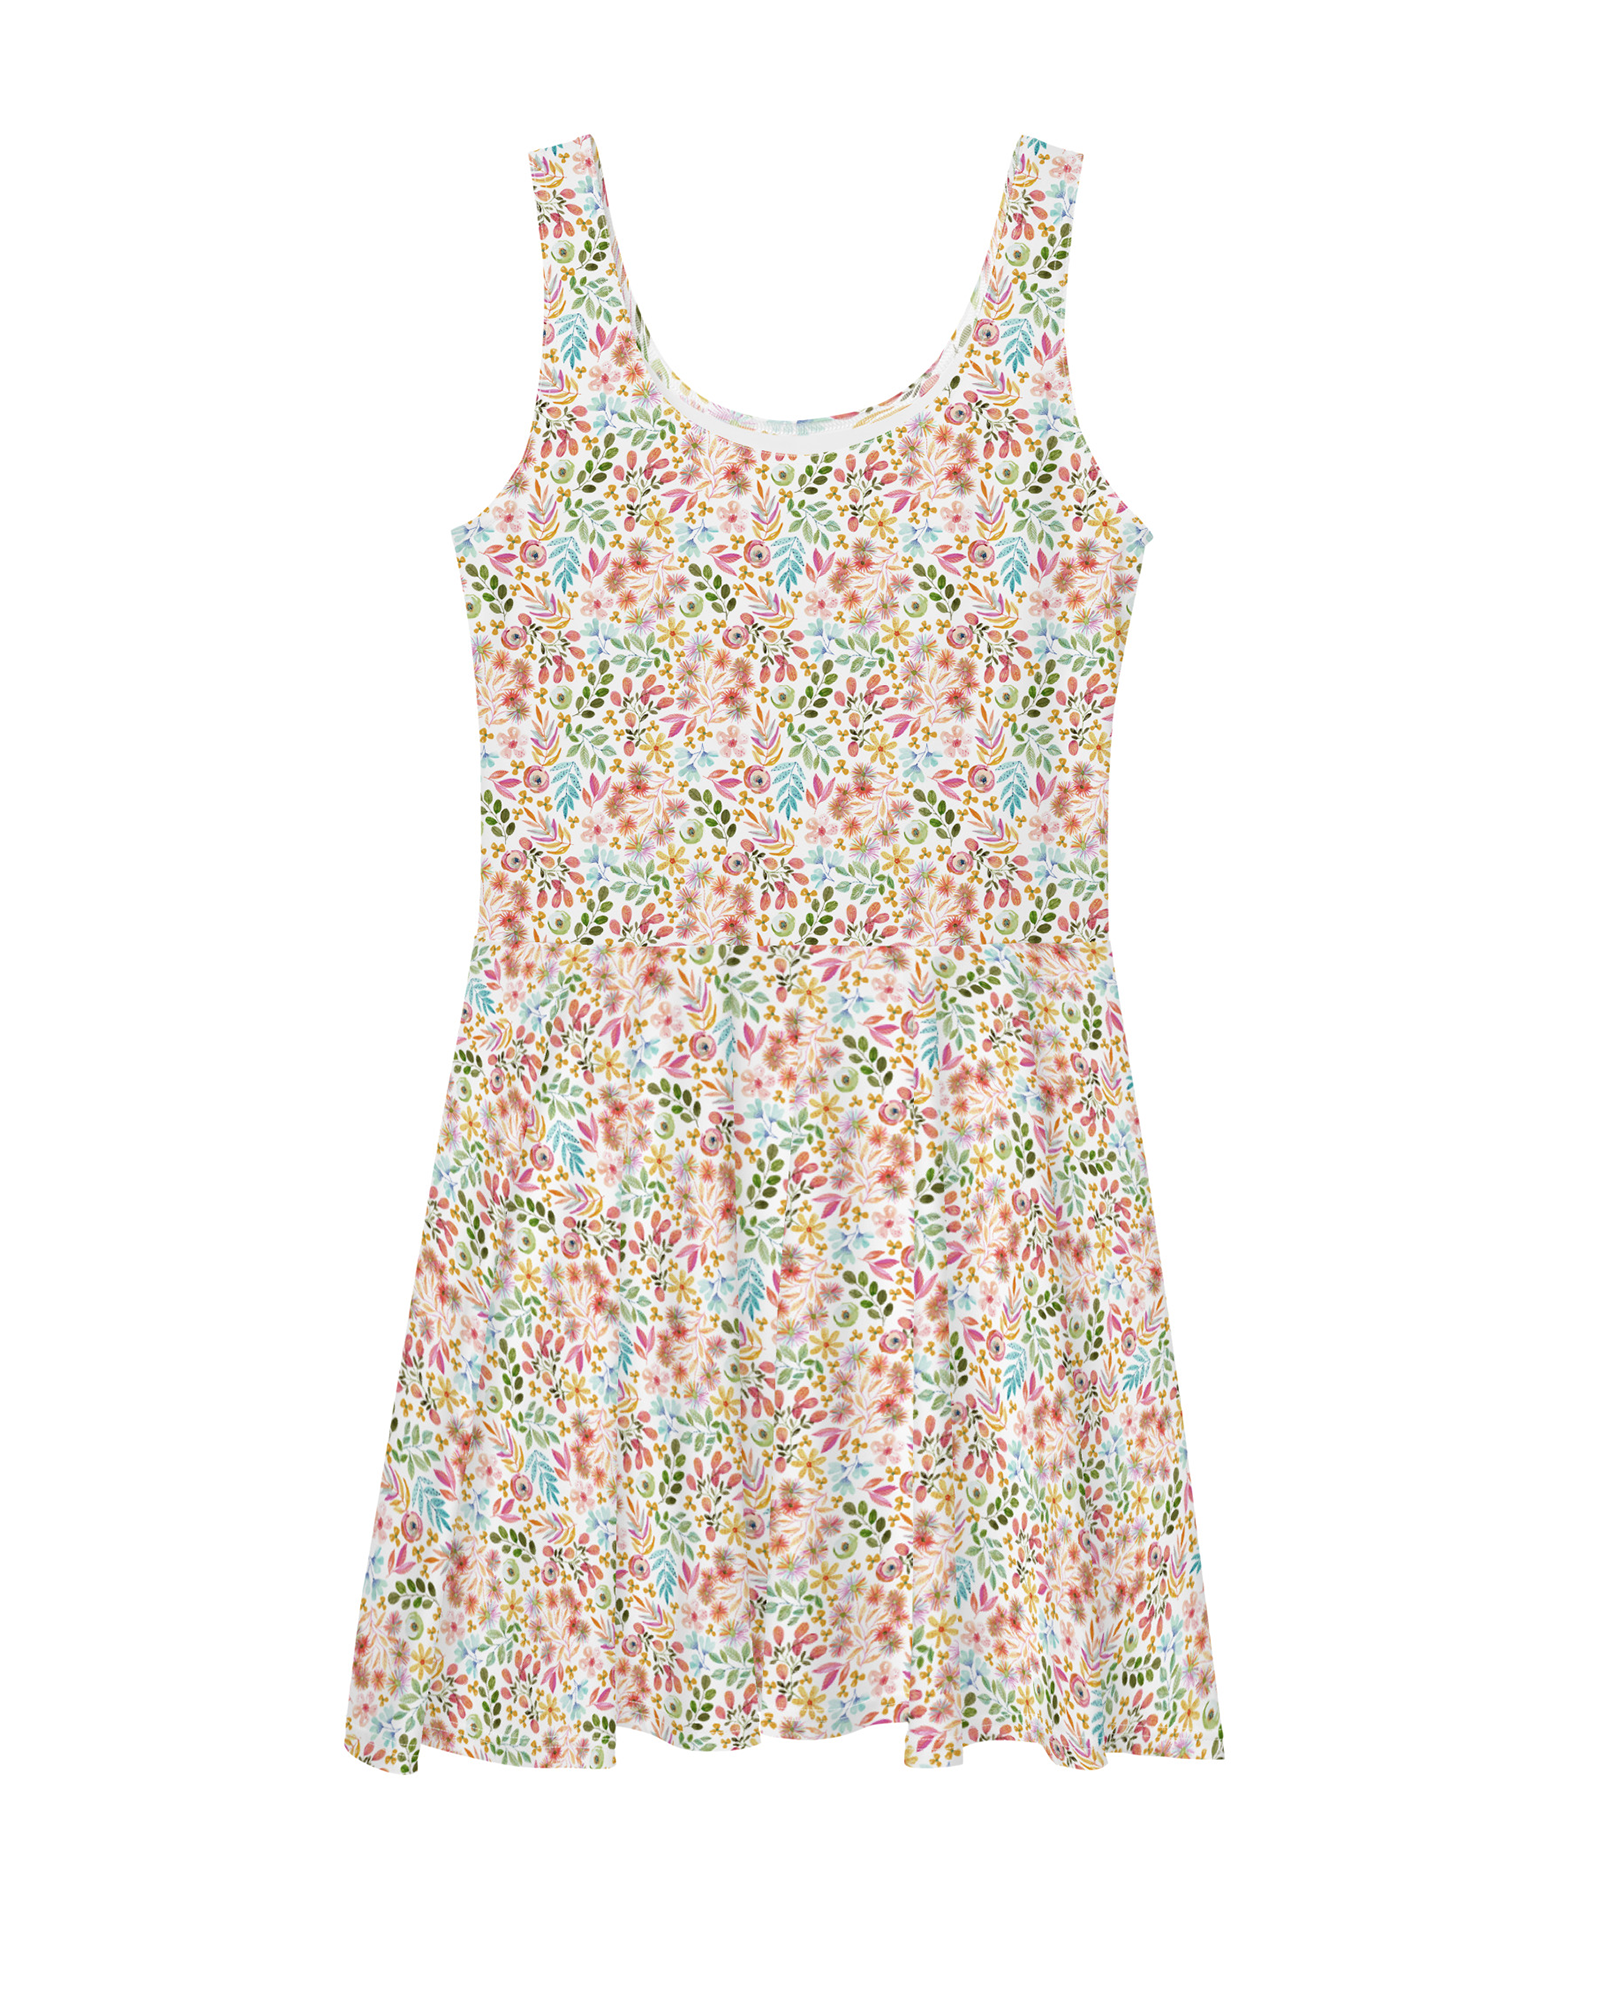 Garden Gala small pastel floral printed sleeveless dress with a scoopneck, pictured flat front view on white background